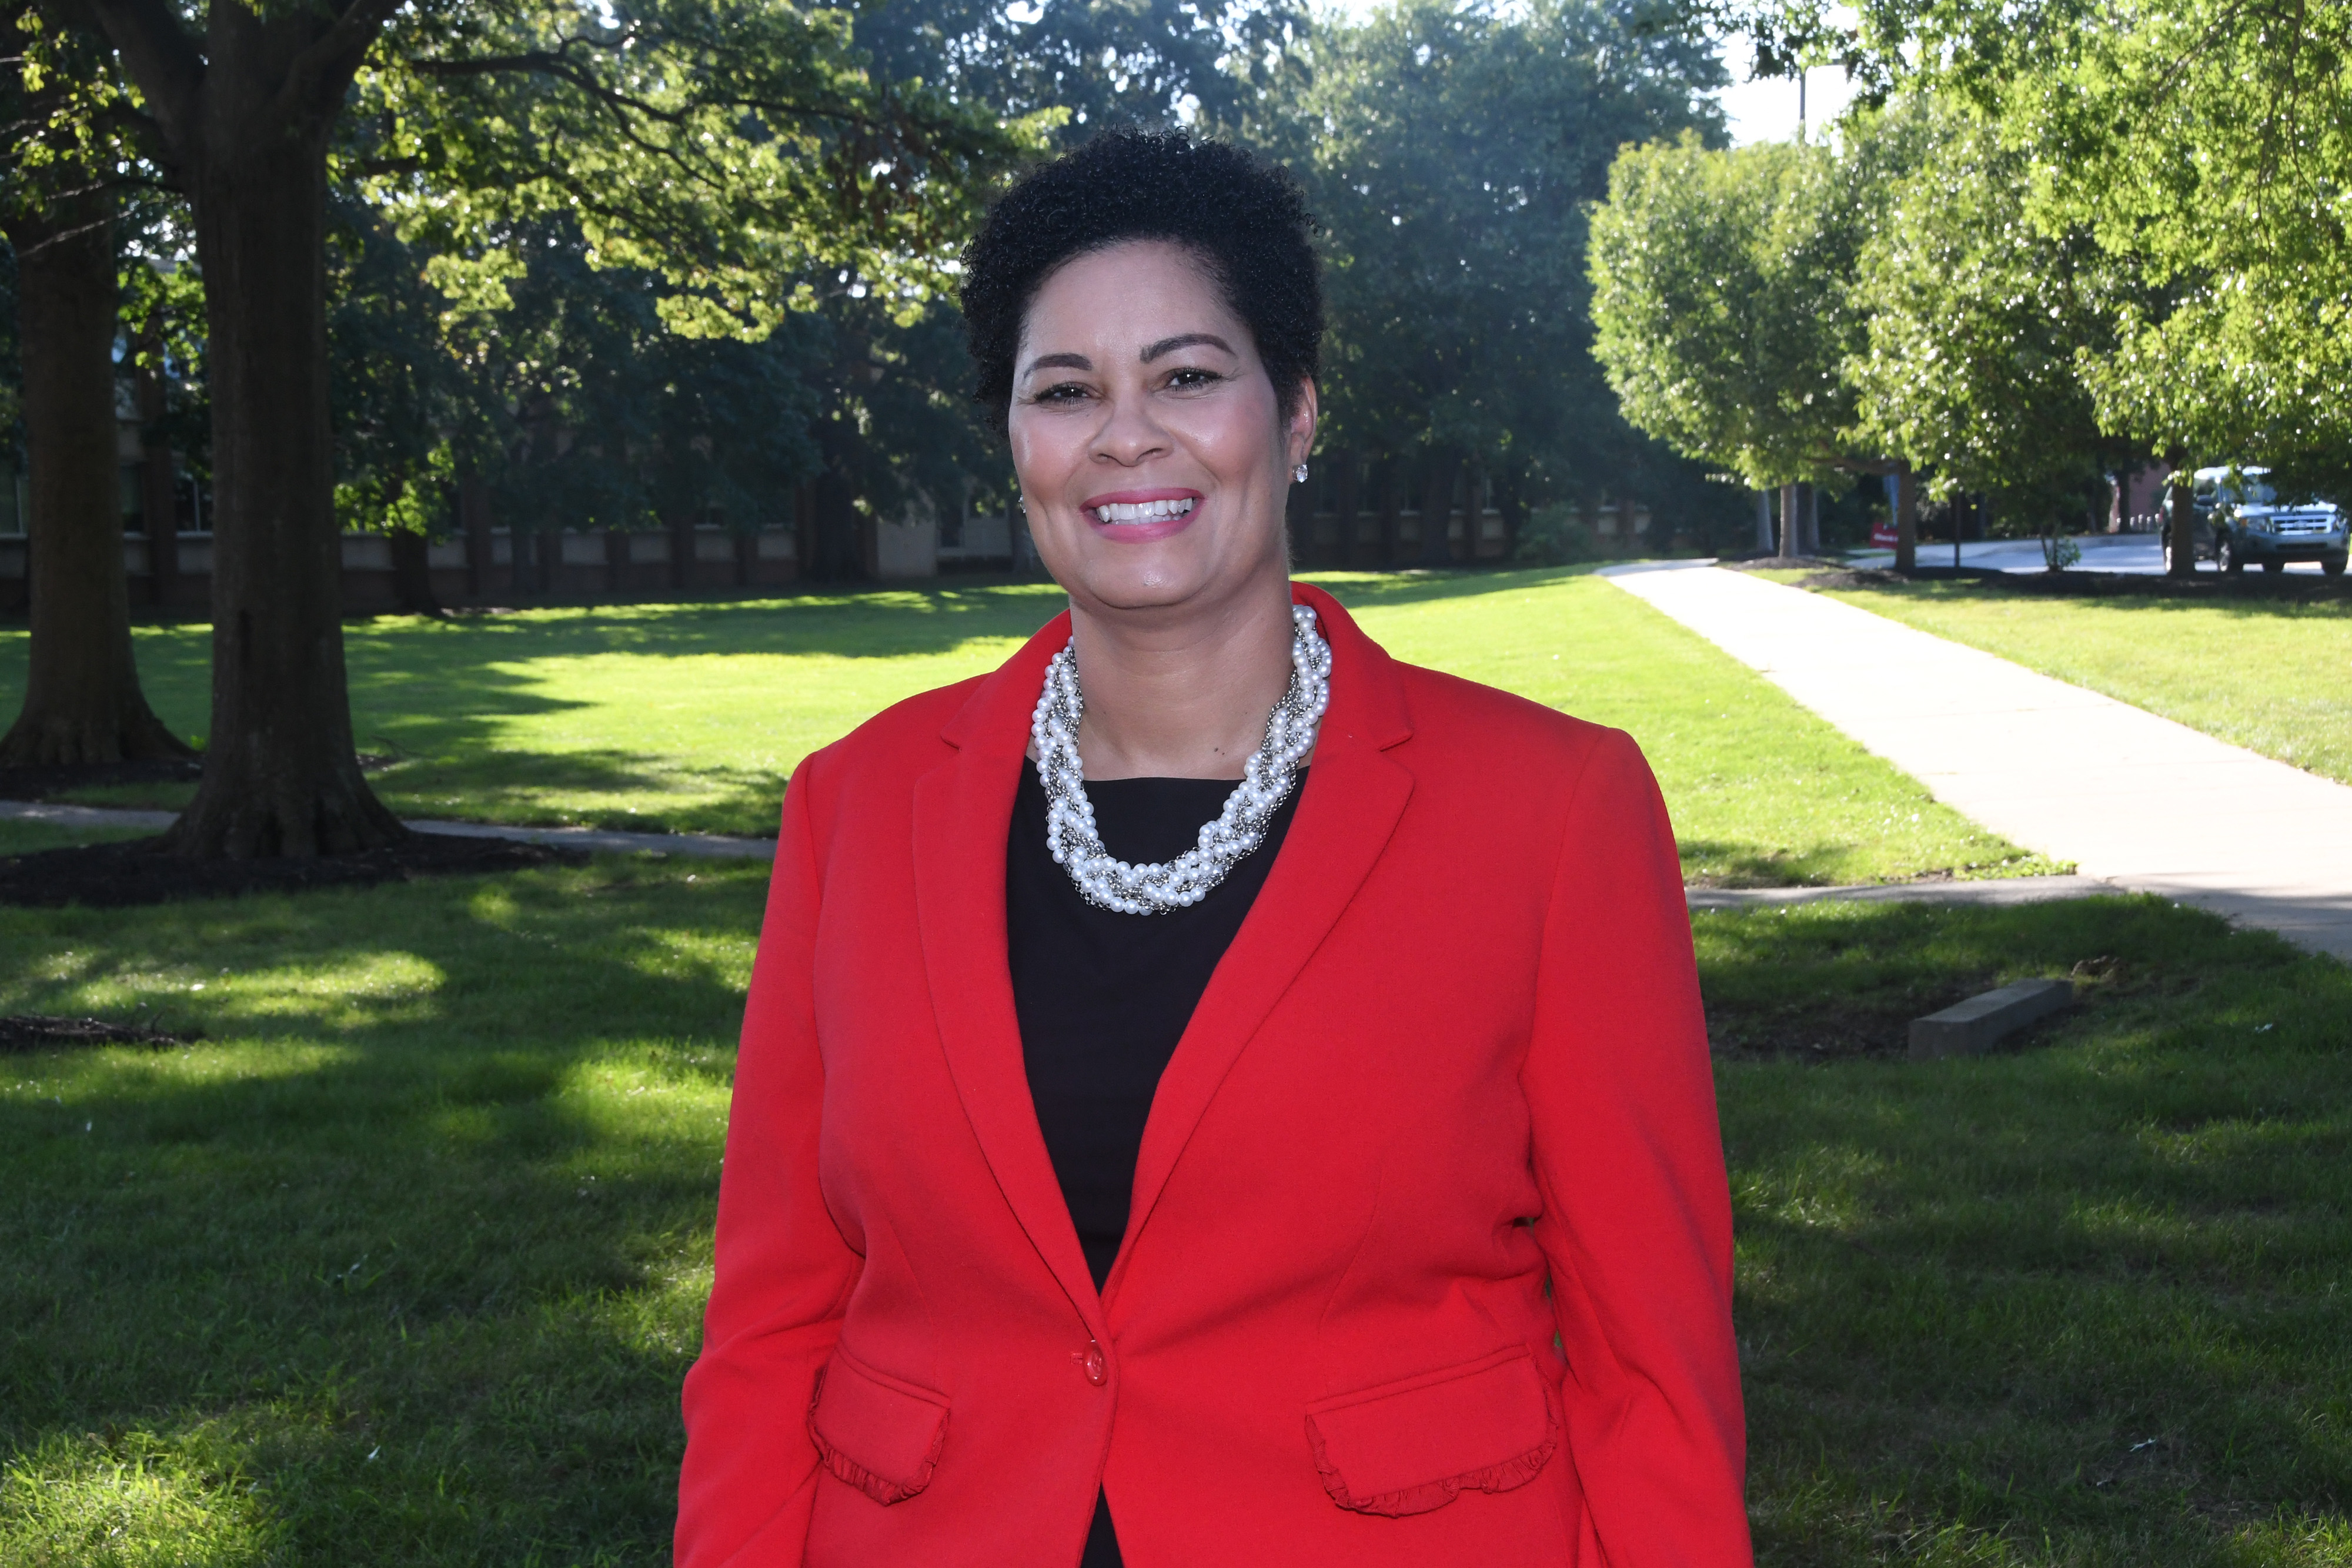 Jackie Griffith will serve as DSU's primary liaison with elective and administrative officials at the local, state and federal levels as well as with community partnerships and contacts.